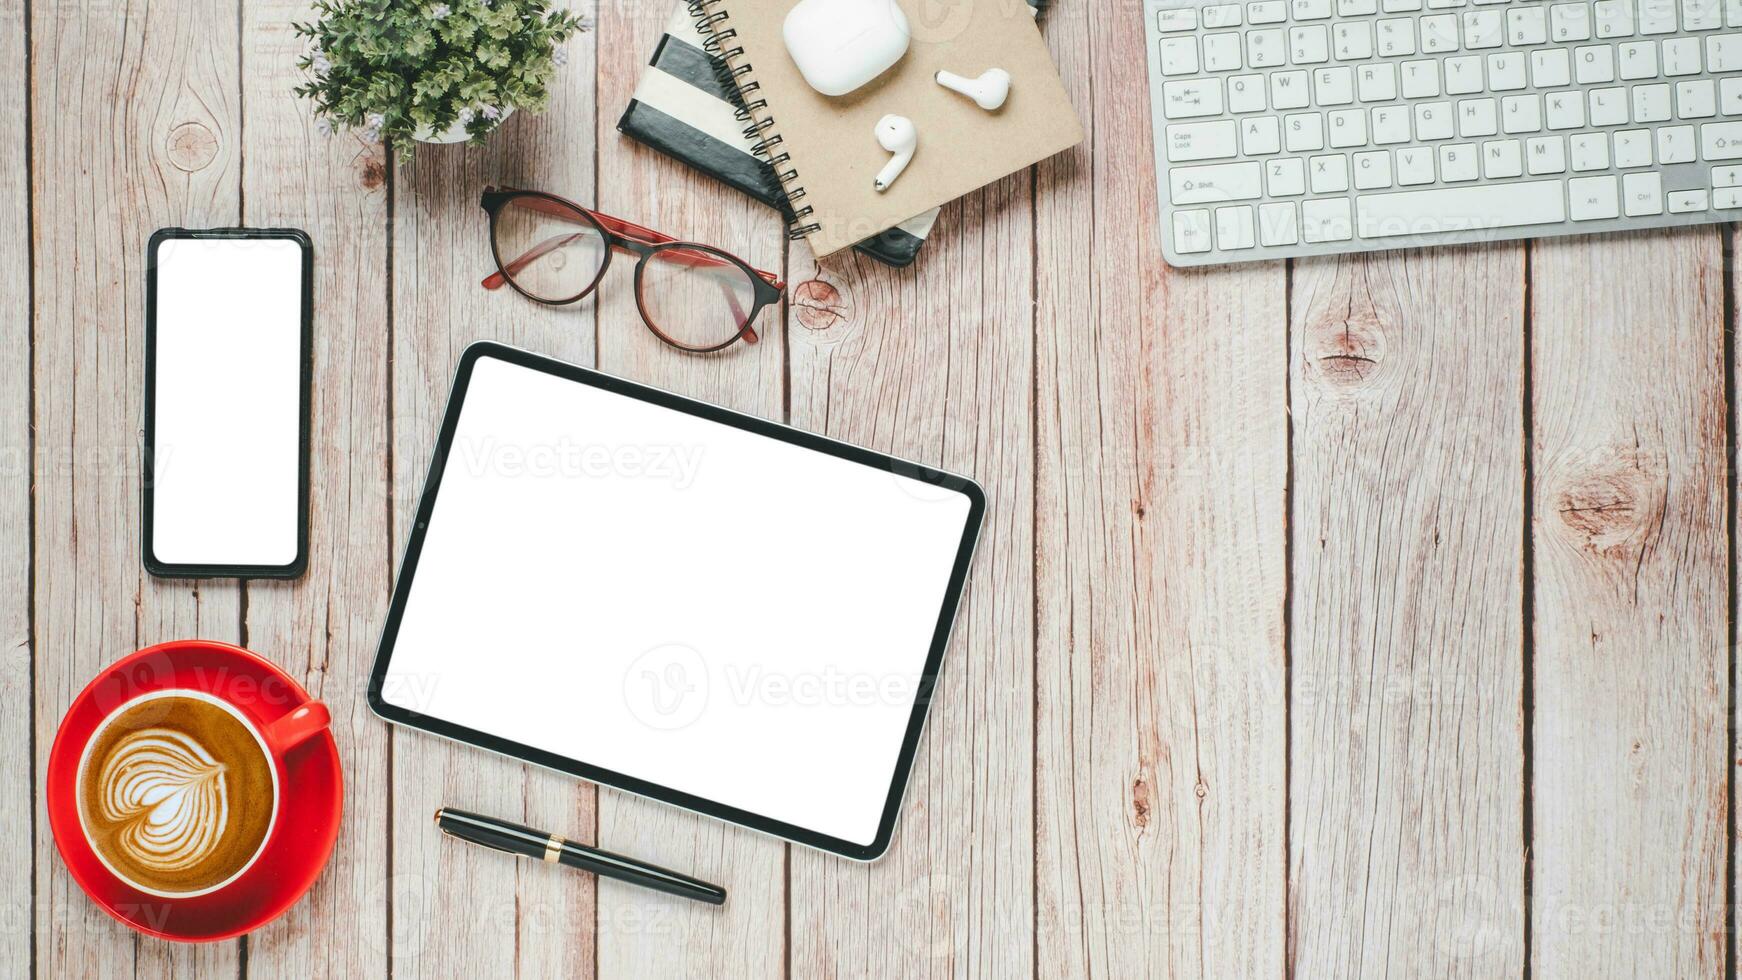 Wooden desk workplace with blank screen tablet and smartphone, keyboard, pen, eyeglass, notebook and cup of coffee, Top view flat lay with copy space. photo